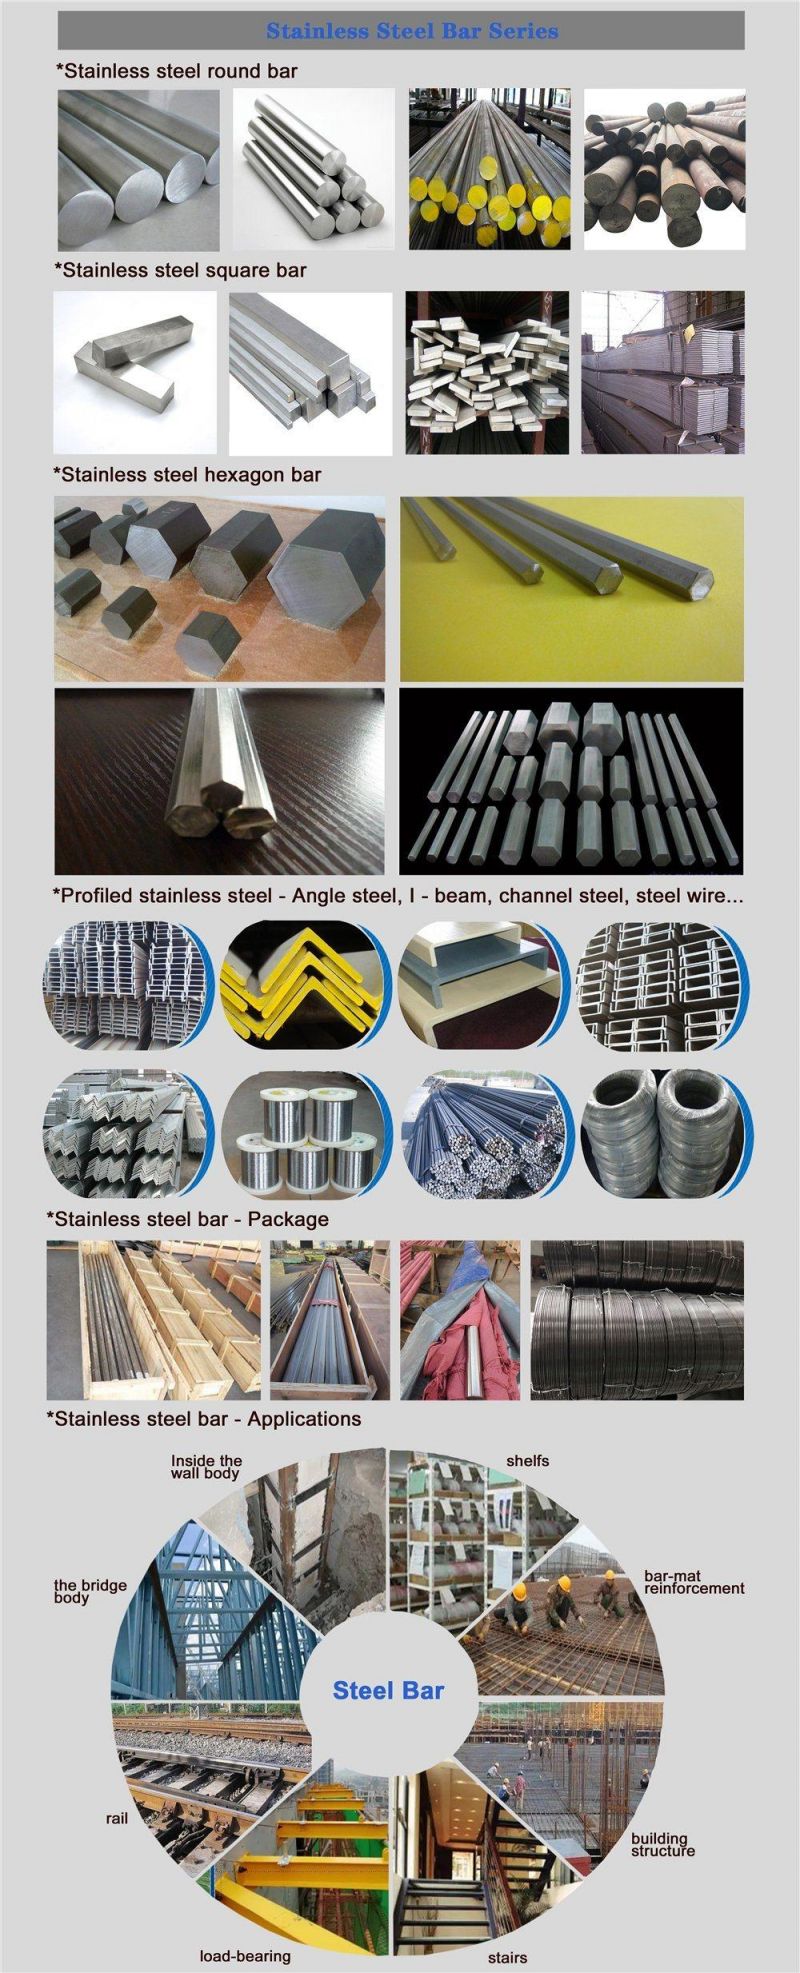 201 304 Welded Filter Wire Mesh Cartridges Dense Mesh for Separating Impurities Perforated Stainless Steel